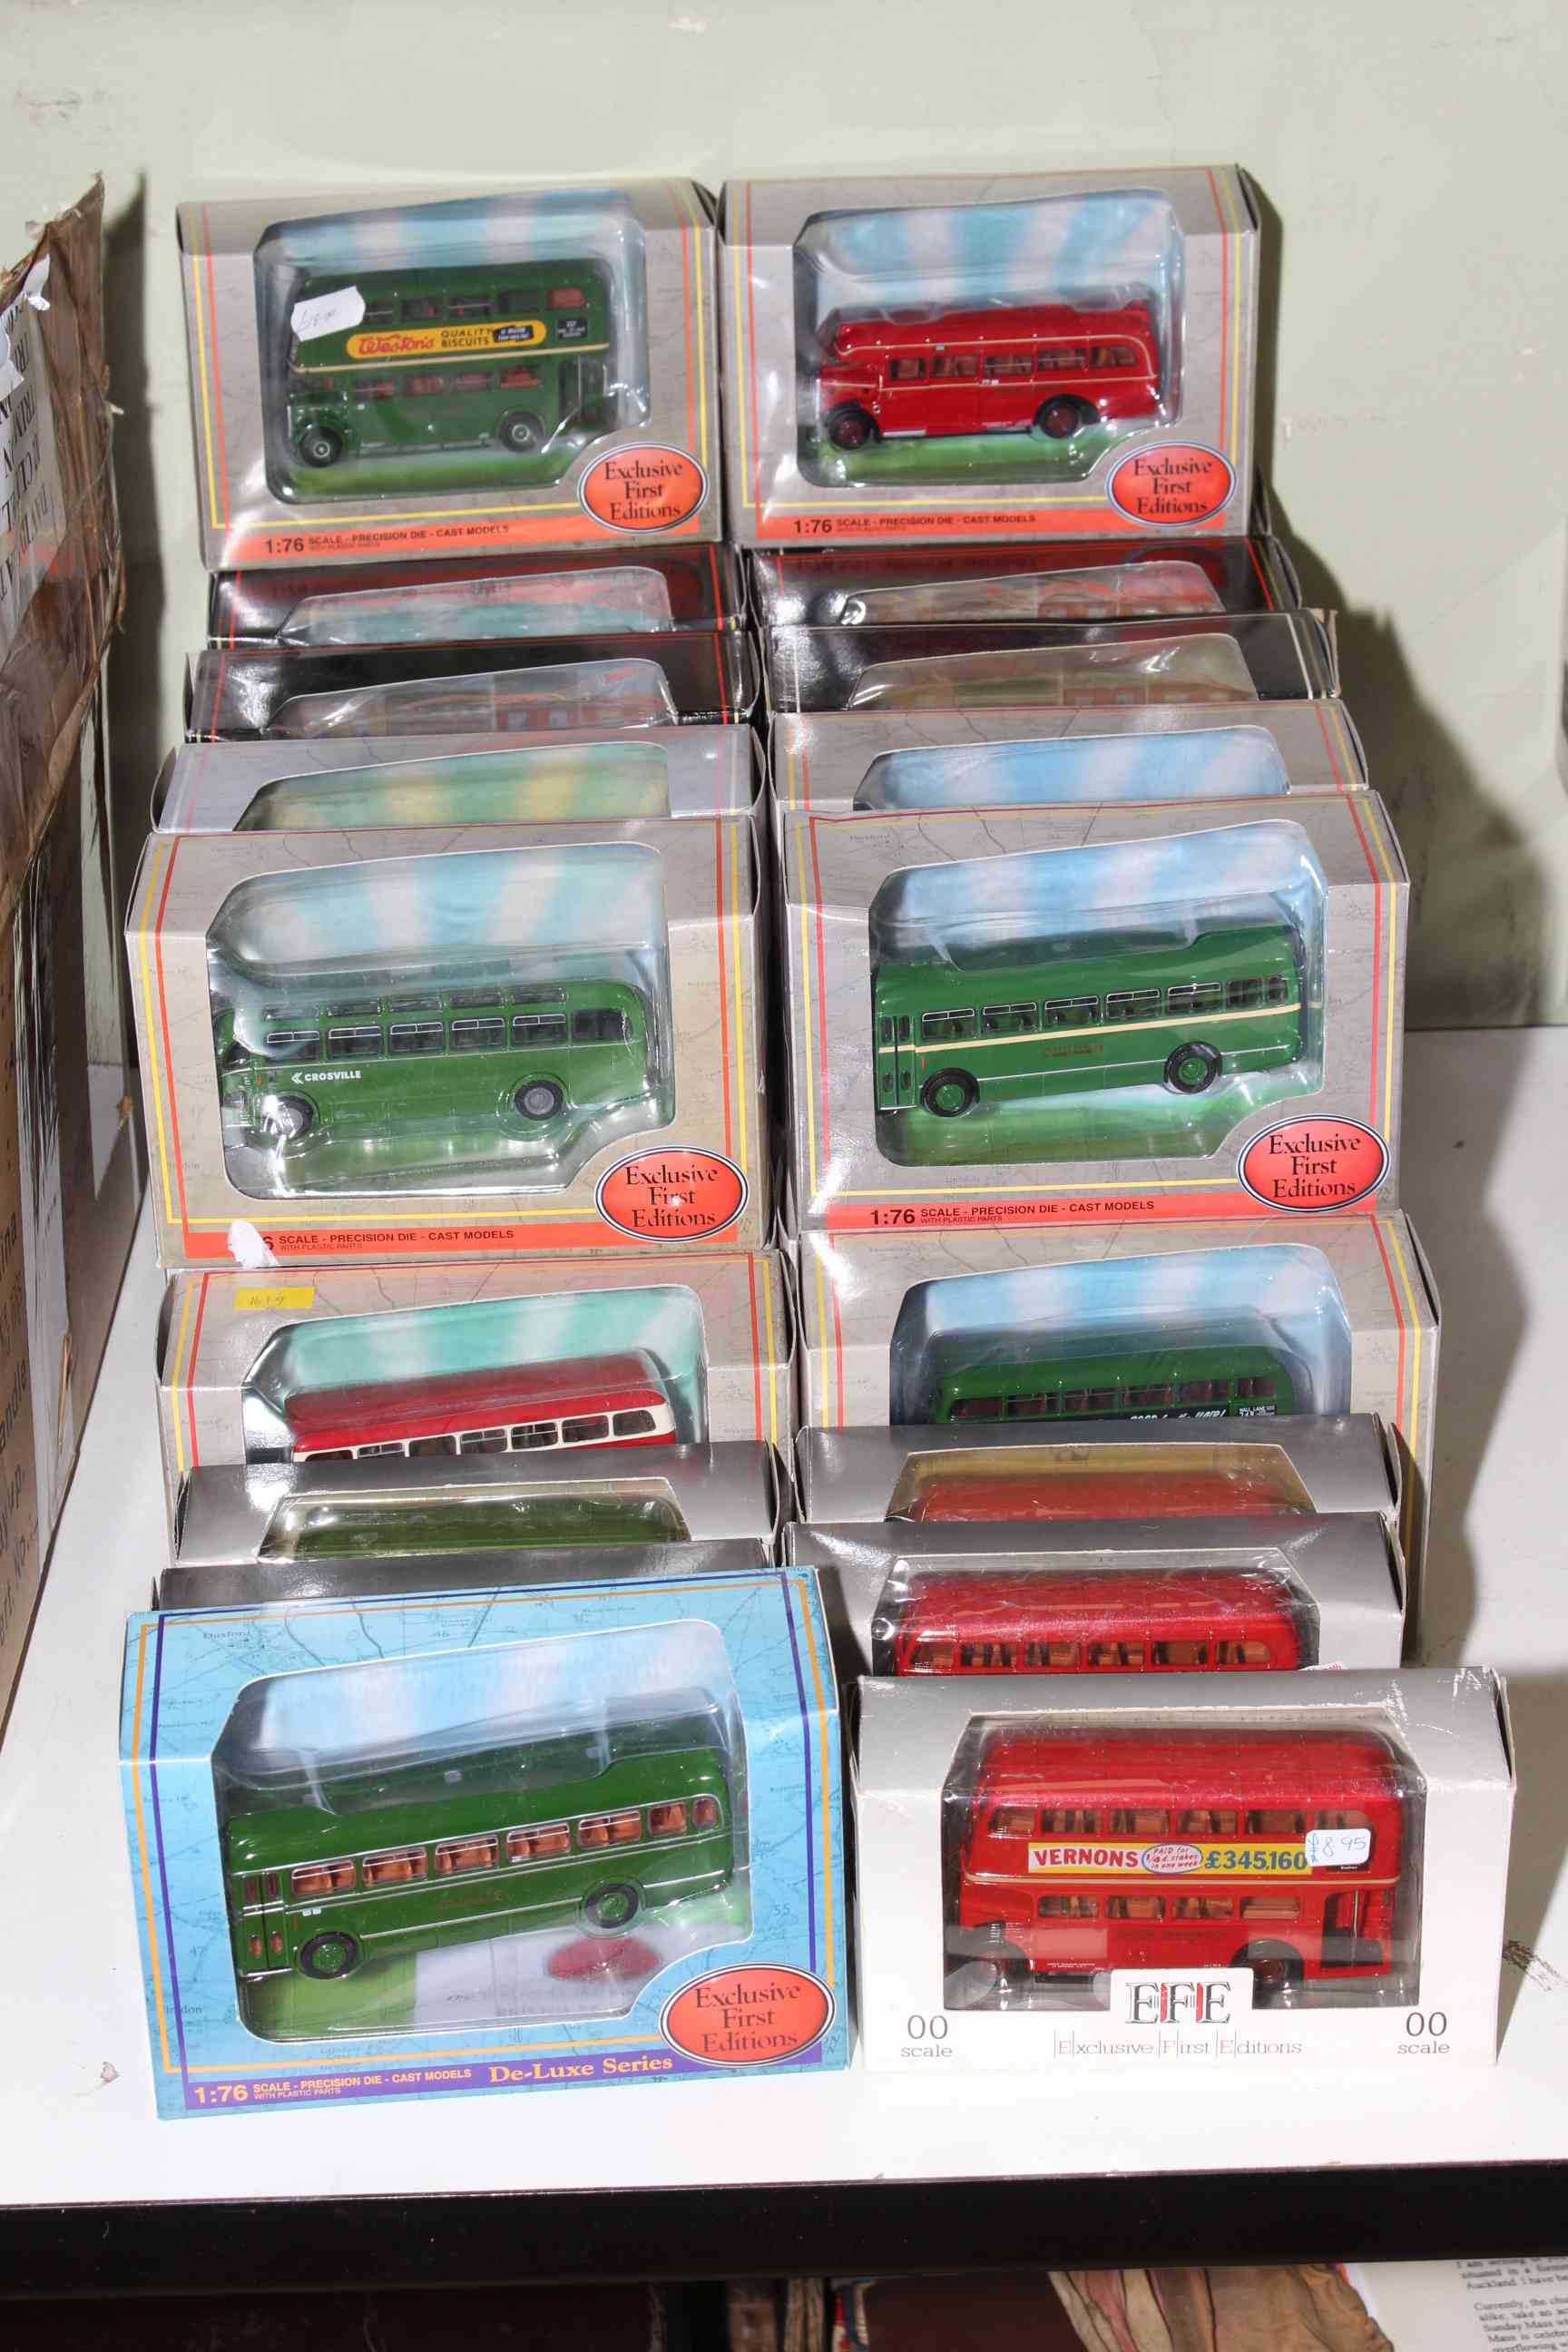 Thirty Exclusive First Editions models of buses.